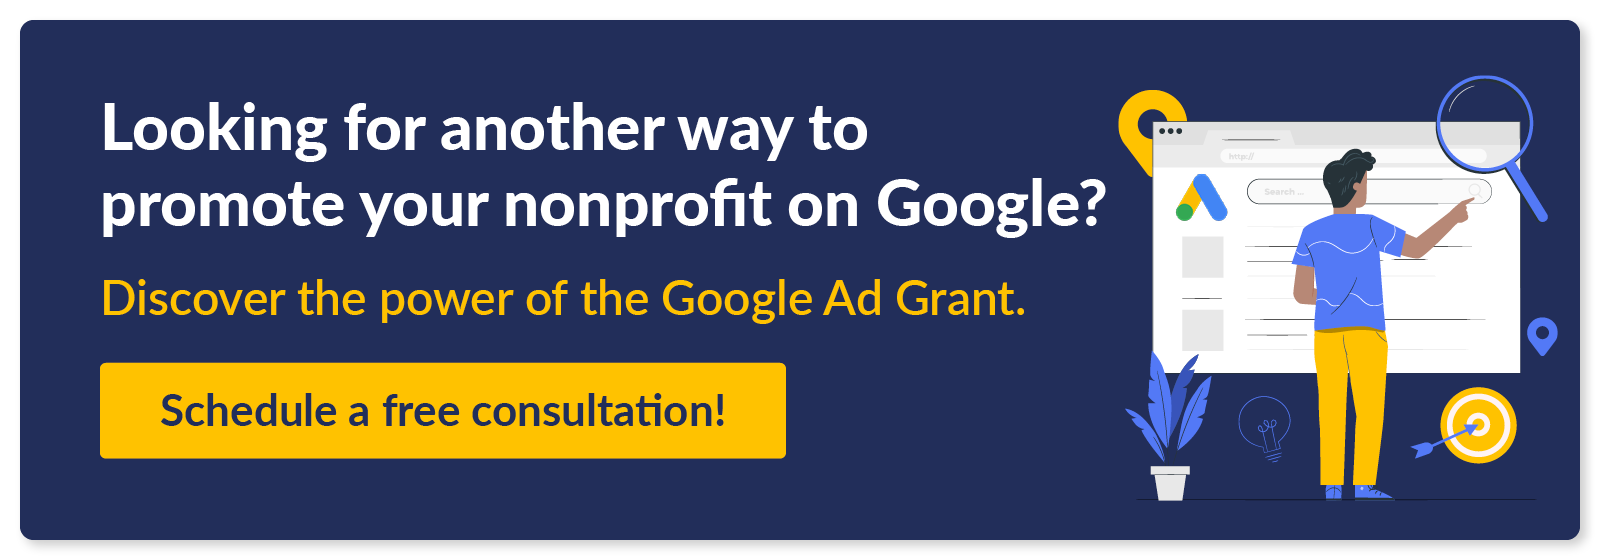 Looking for another way to promote your nonprofit on Google? Discover the power of the Google Ad Grant. Schedule a free consultation. 